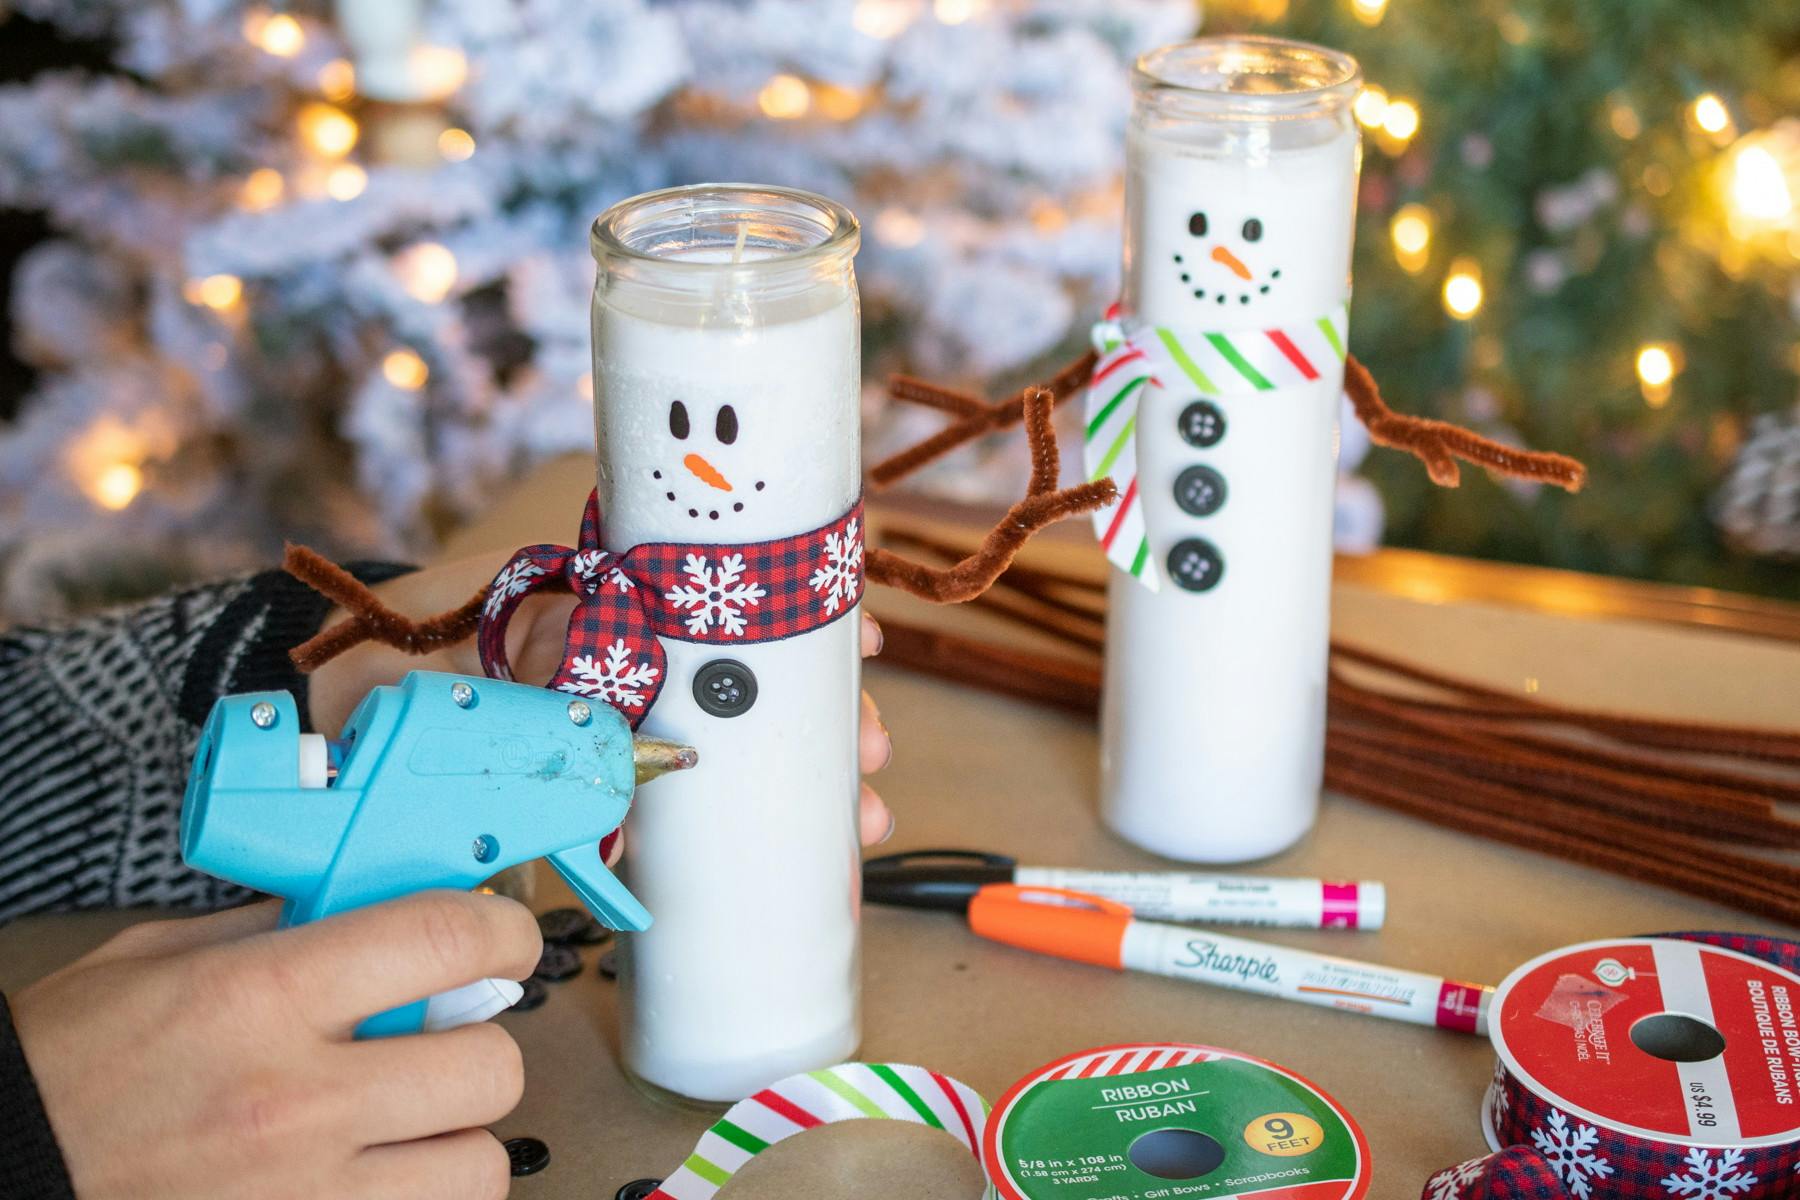 15 Dollar Store Christmas Diy Projects Anyone Can Do The Krazy Coupon Lady